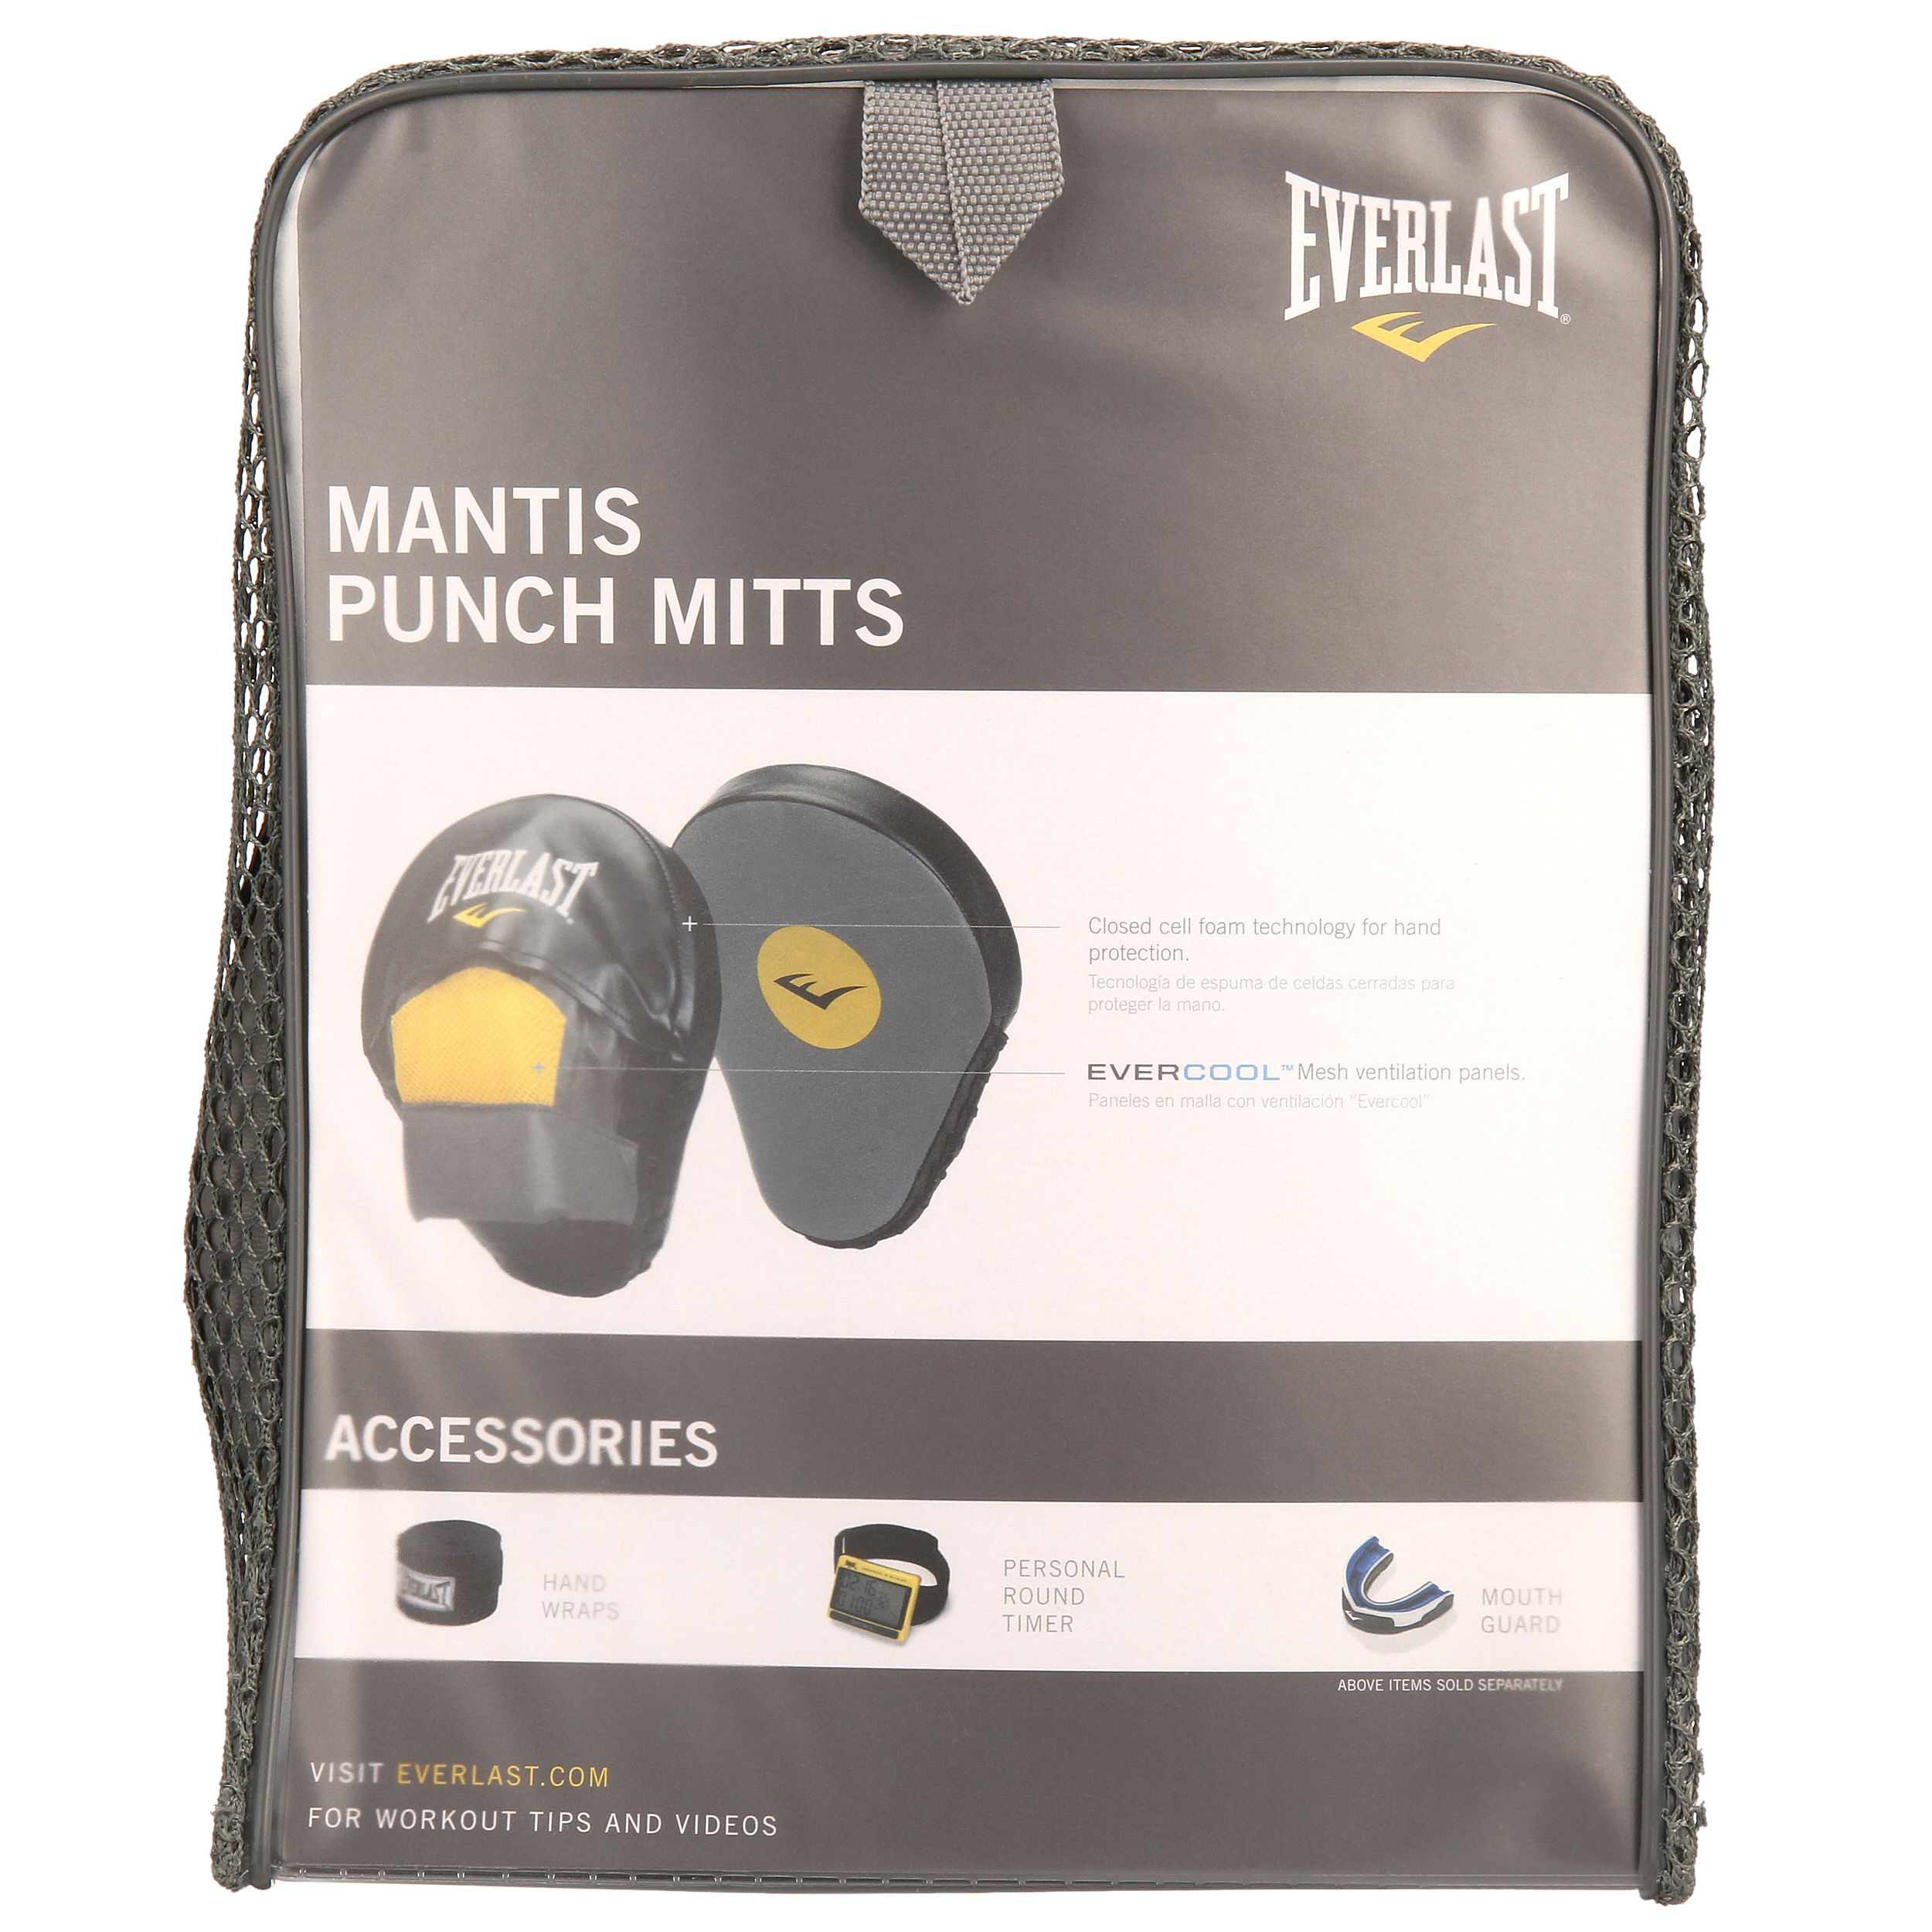 Everlast Mantis Punch Mitts, One Size - image 3 of 6